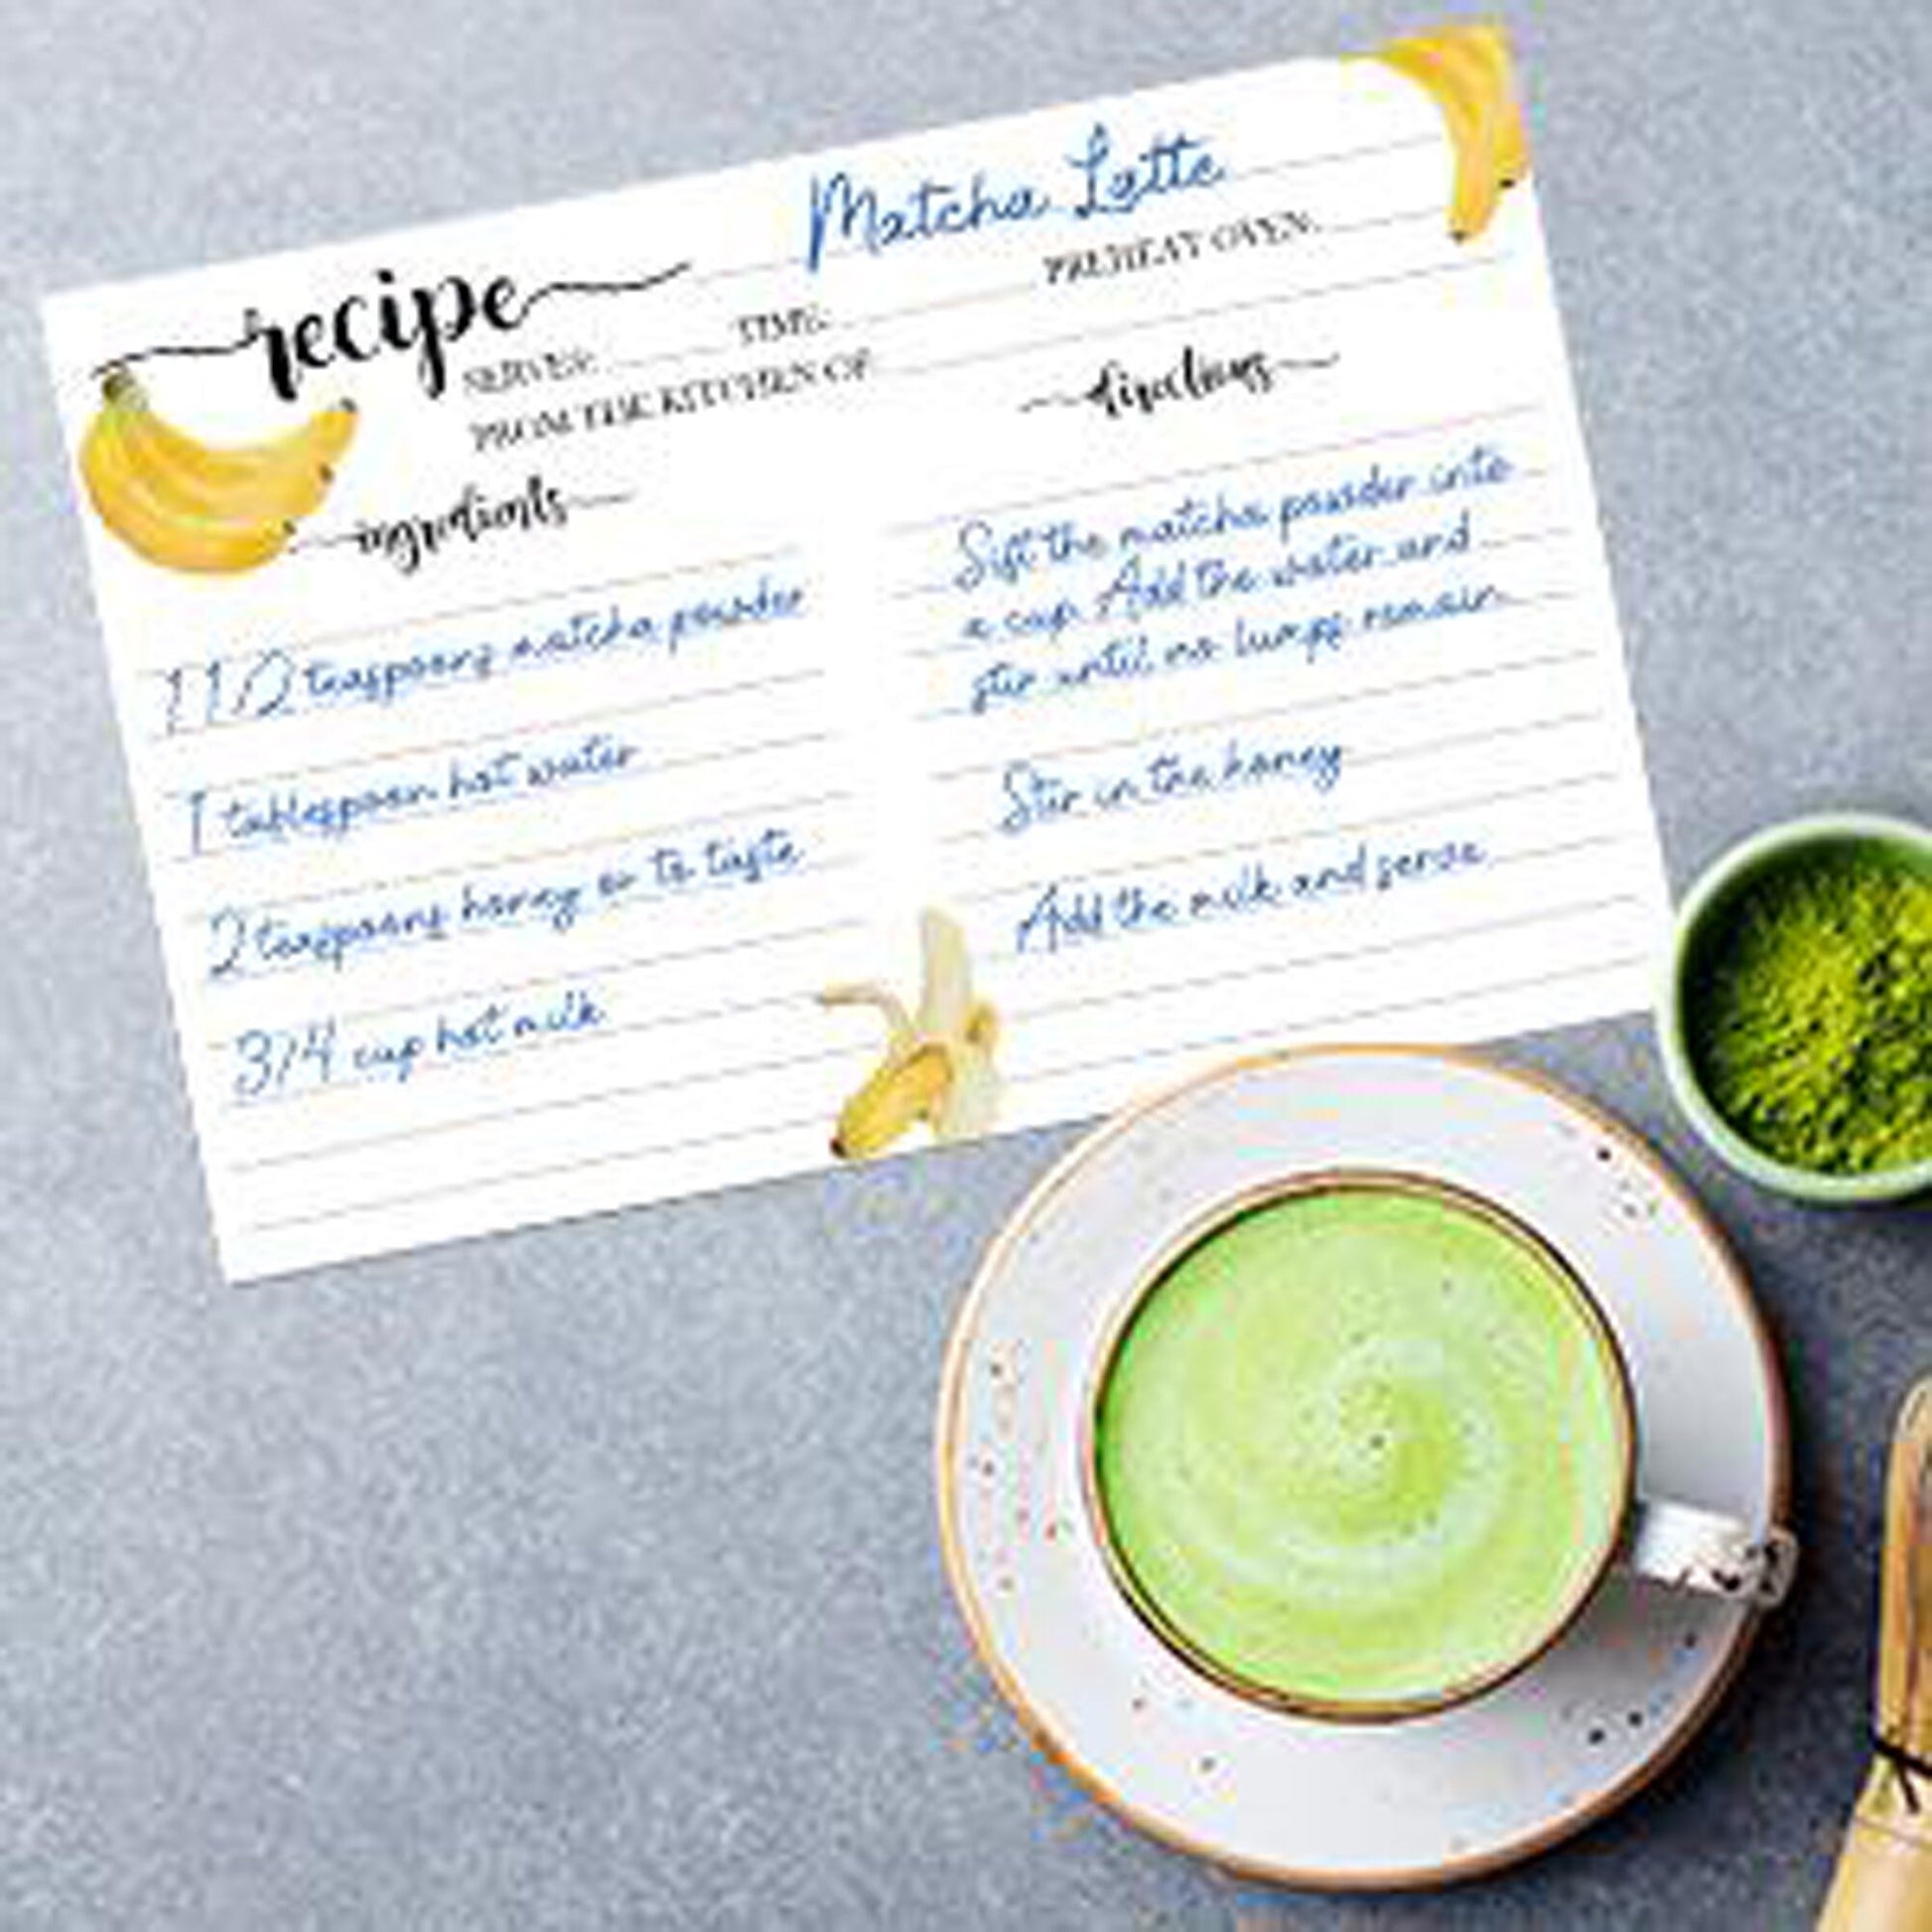 Banana Recipe Cards 4x6 Inch Cute Notecards - Matte, Non-Smudge, Thick Paper - Lined Recipe Template Index Cards - Wedding, Bridal Showers